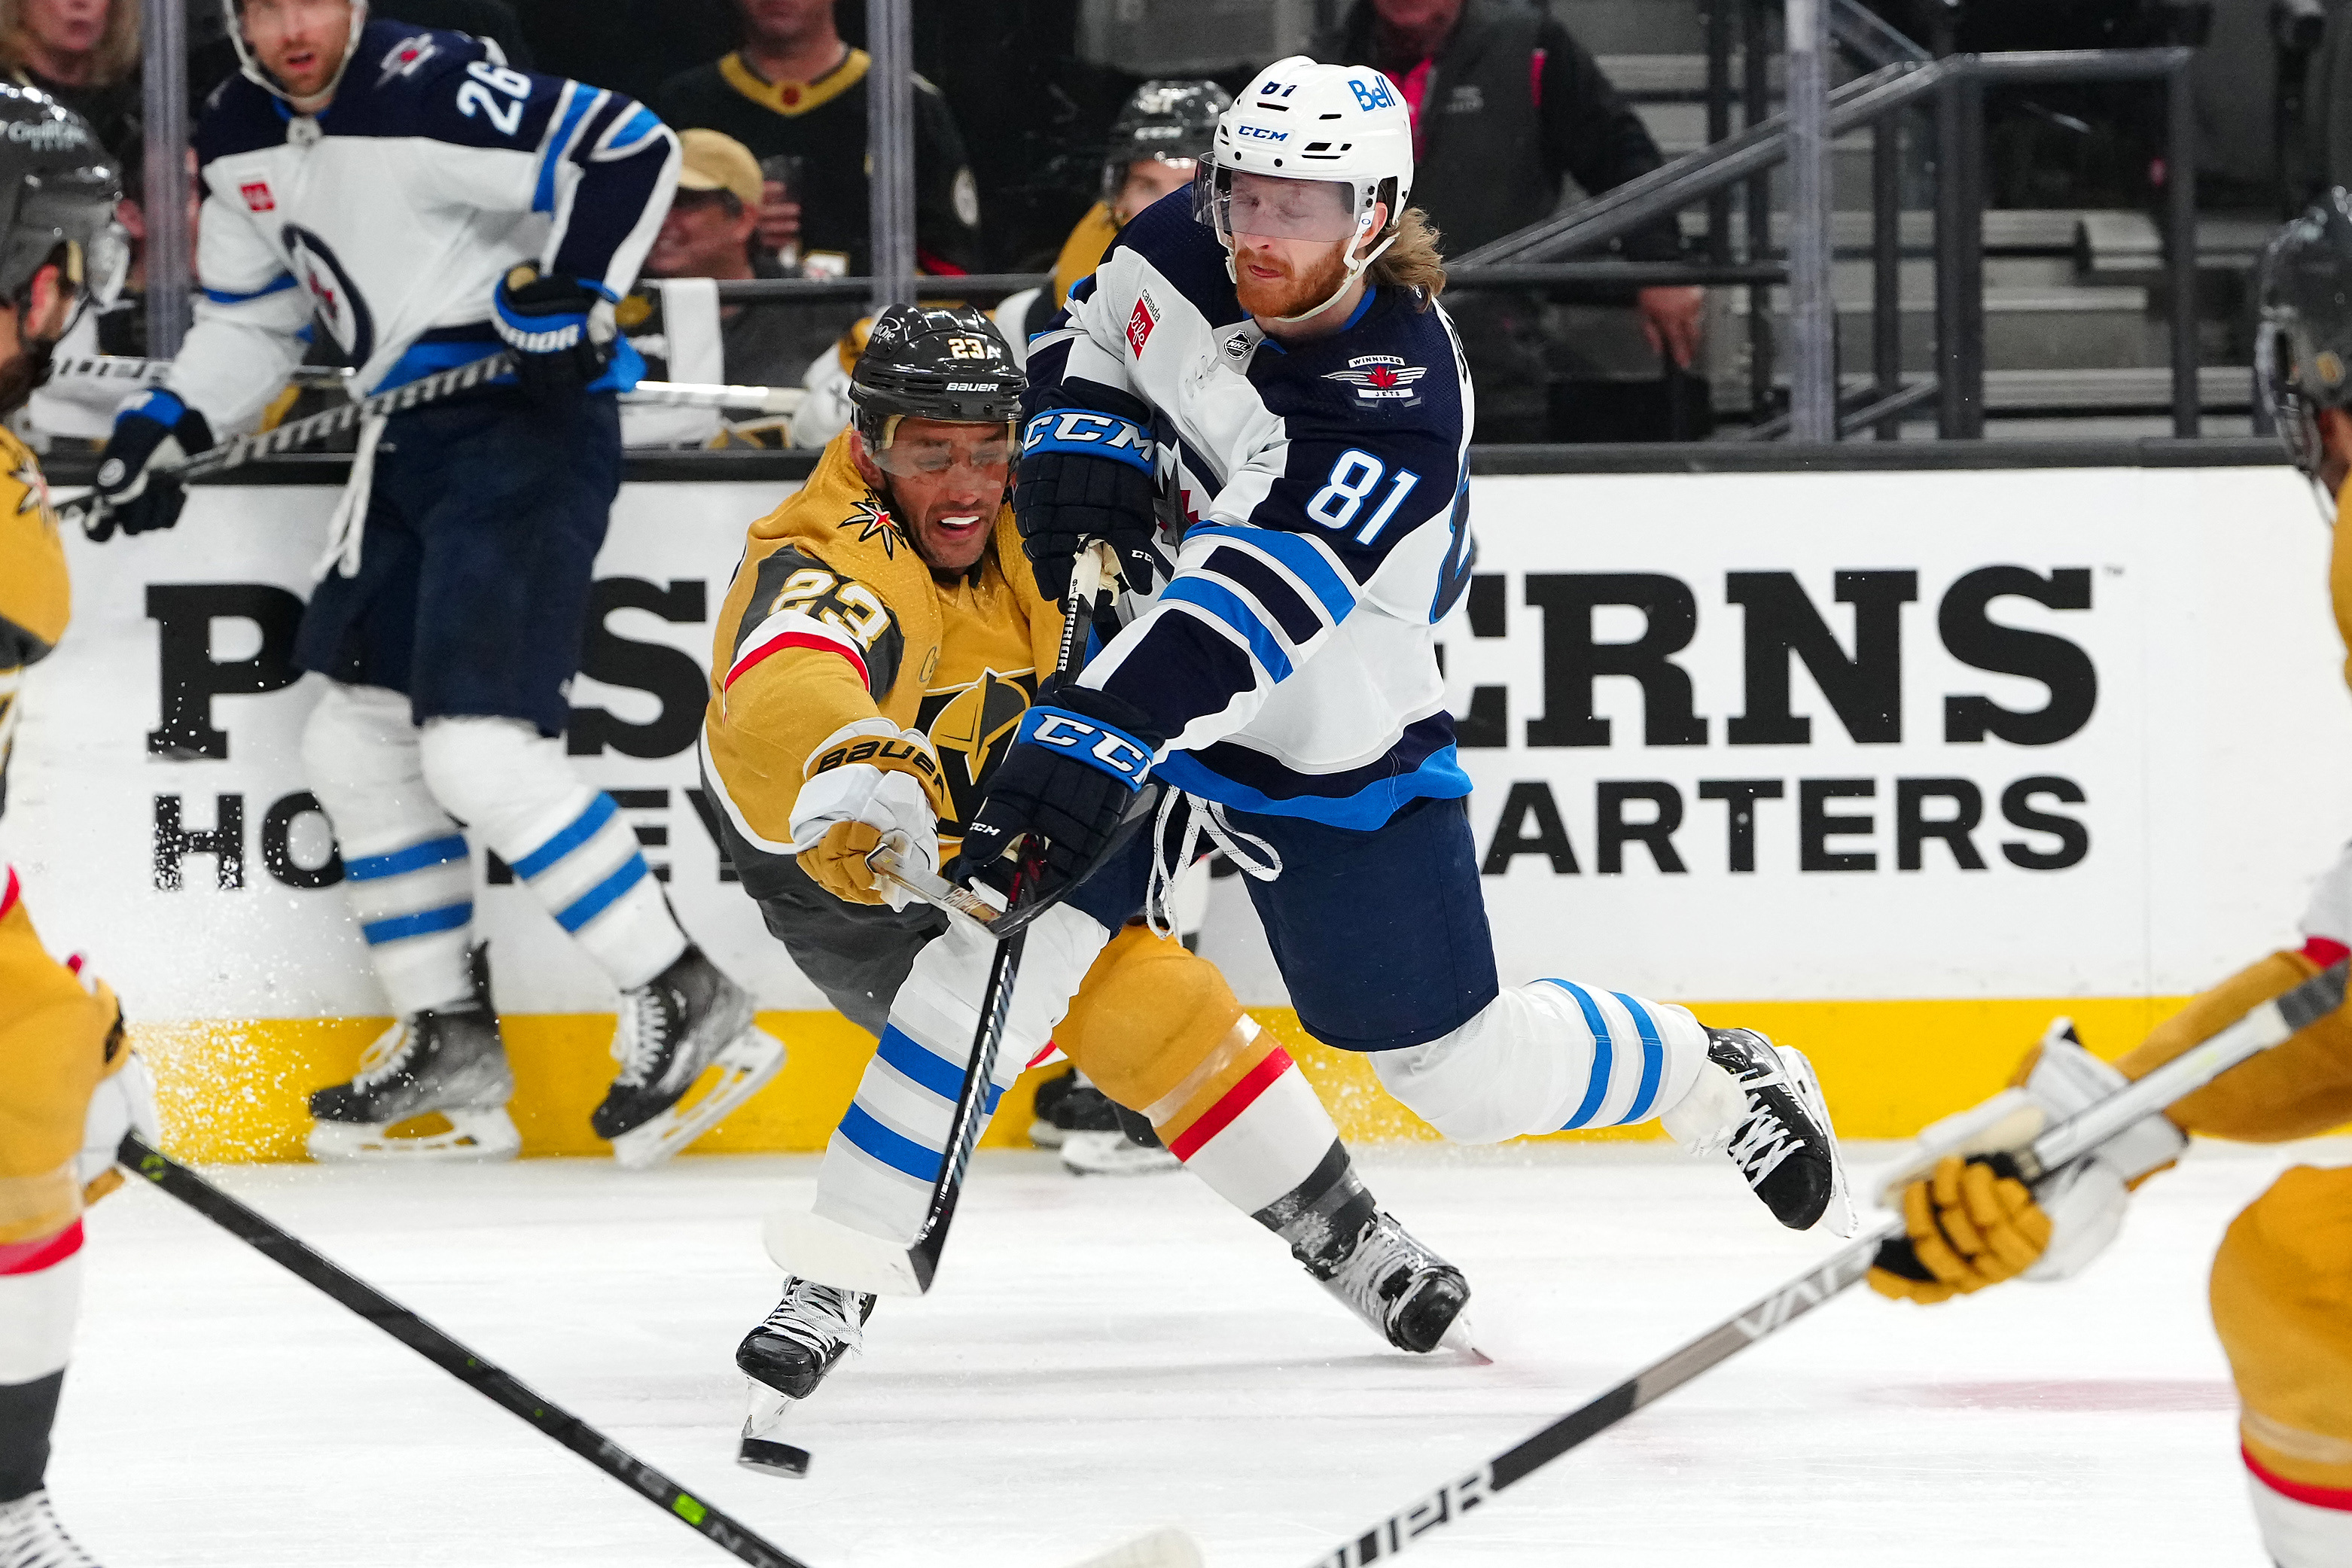 Around the NHL: Jets await clearance for Ehlers; Wild's Eriksson